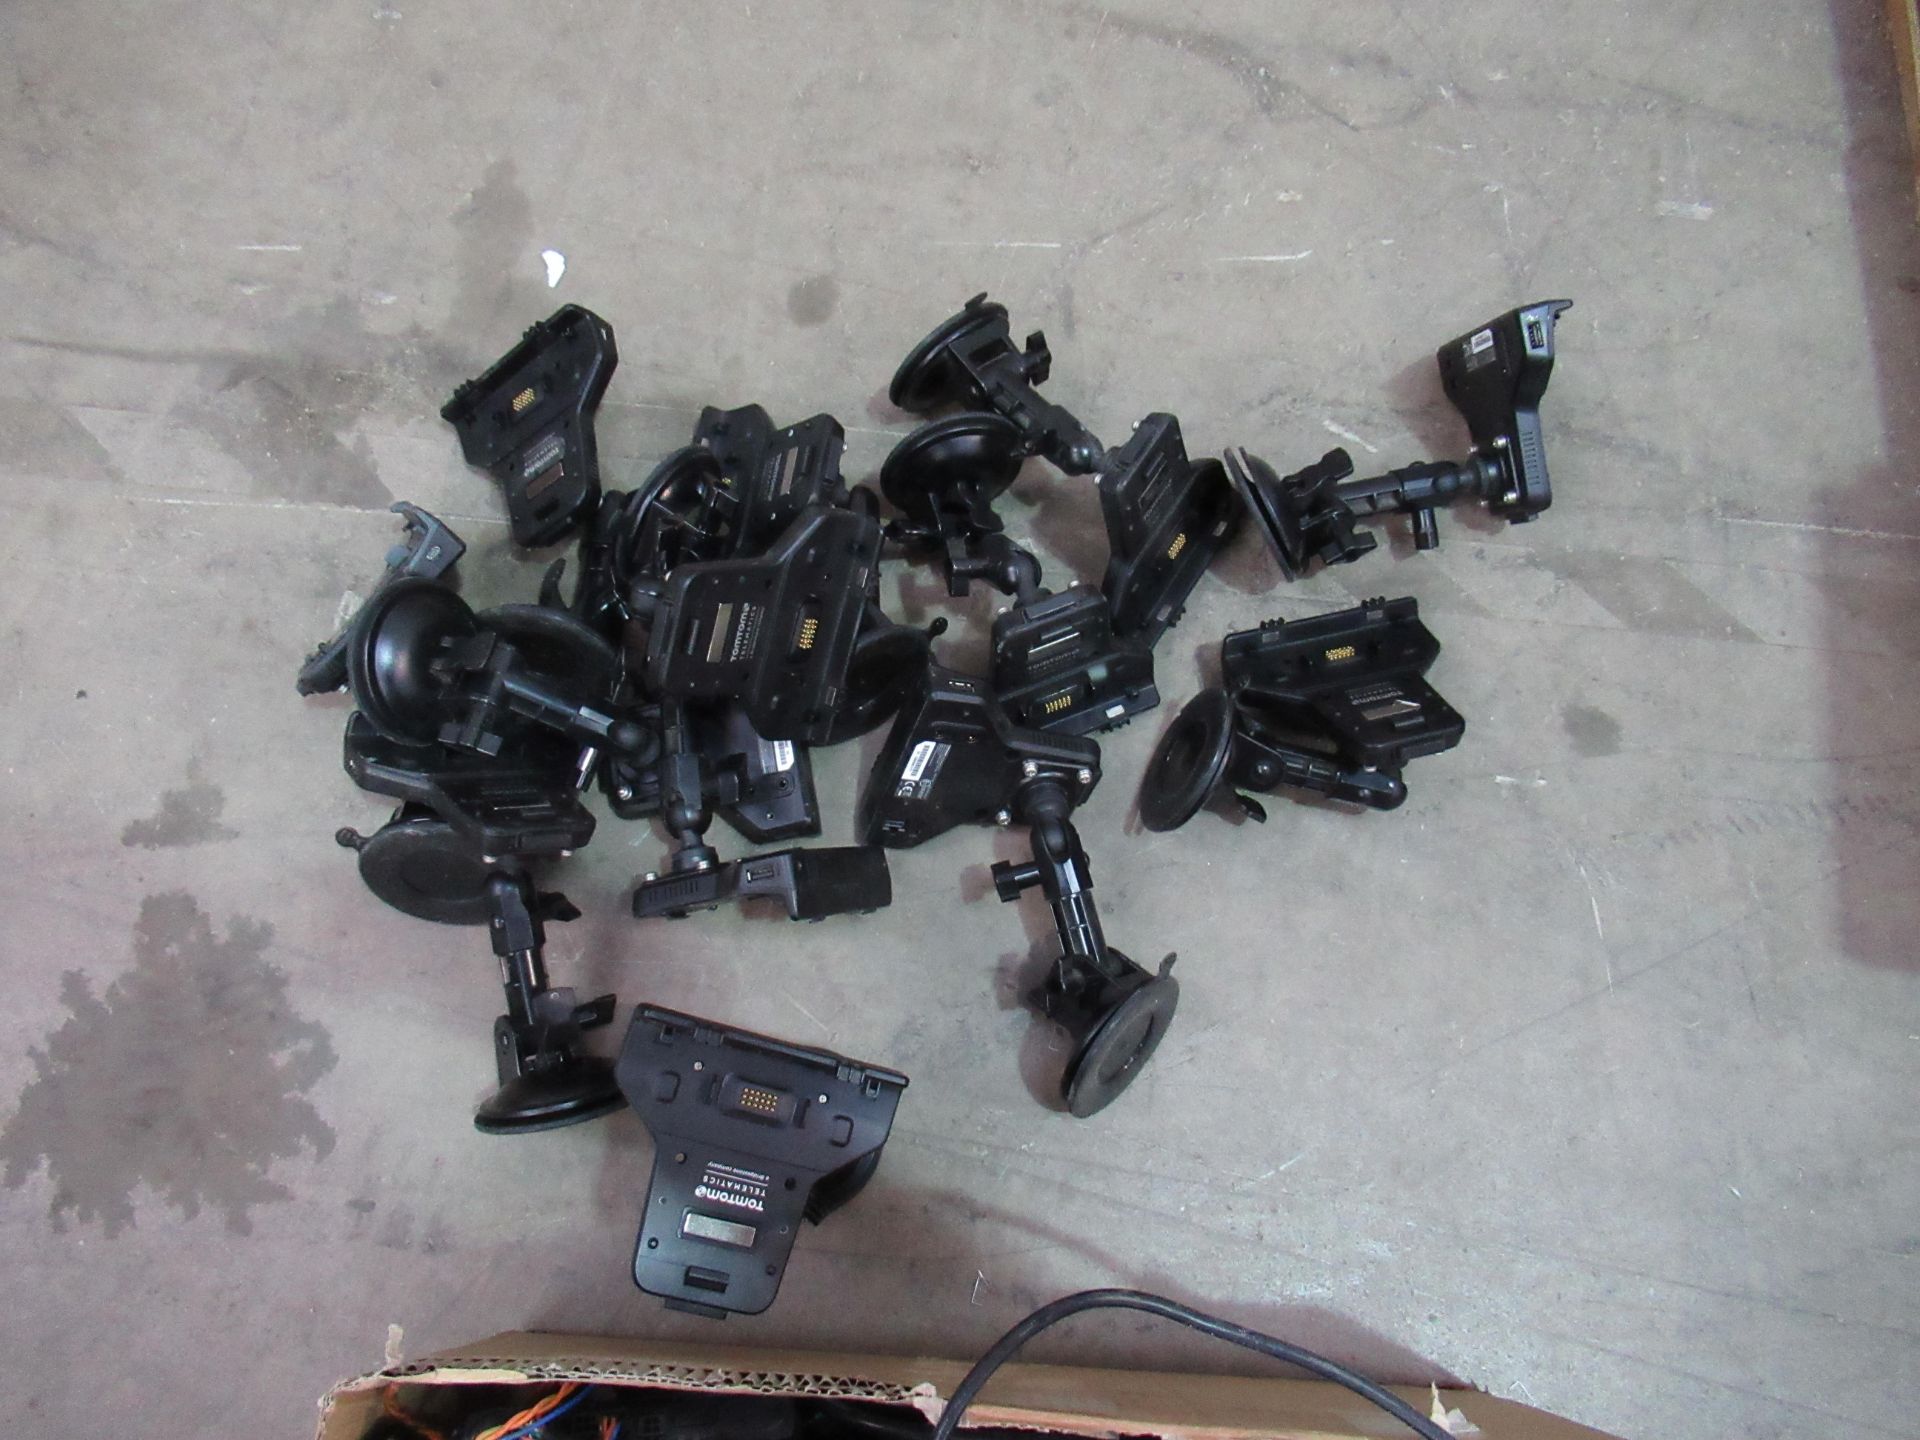 13x TomTom telematics sat-navs with assorted cables and harnesses - Image 6 of 6